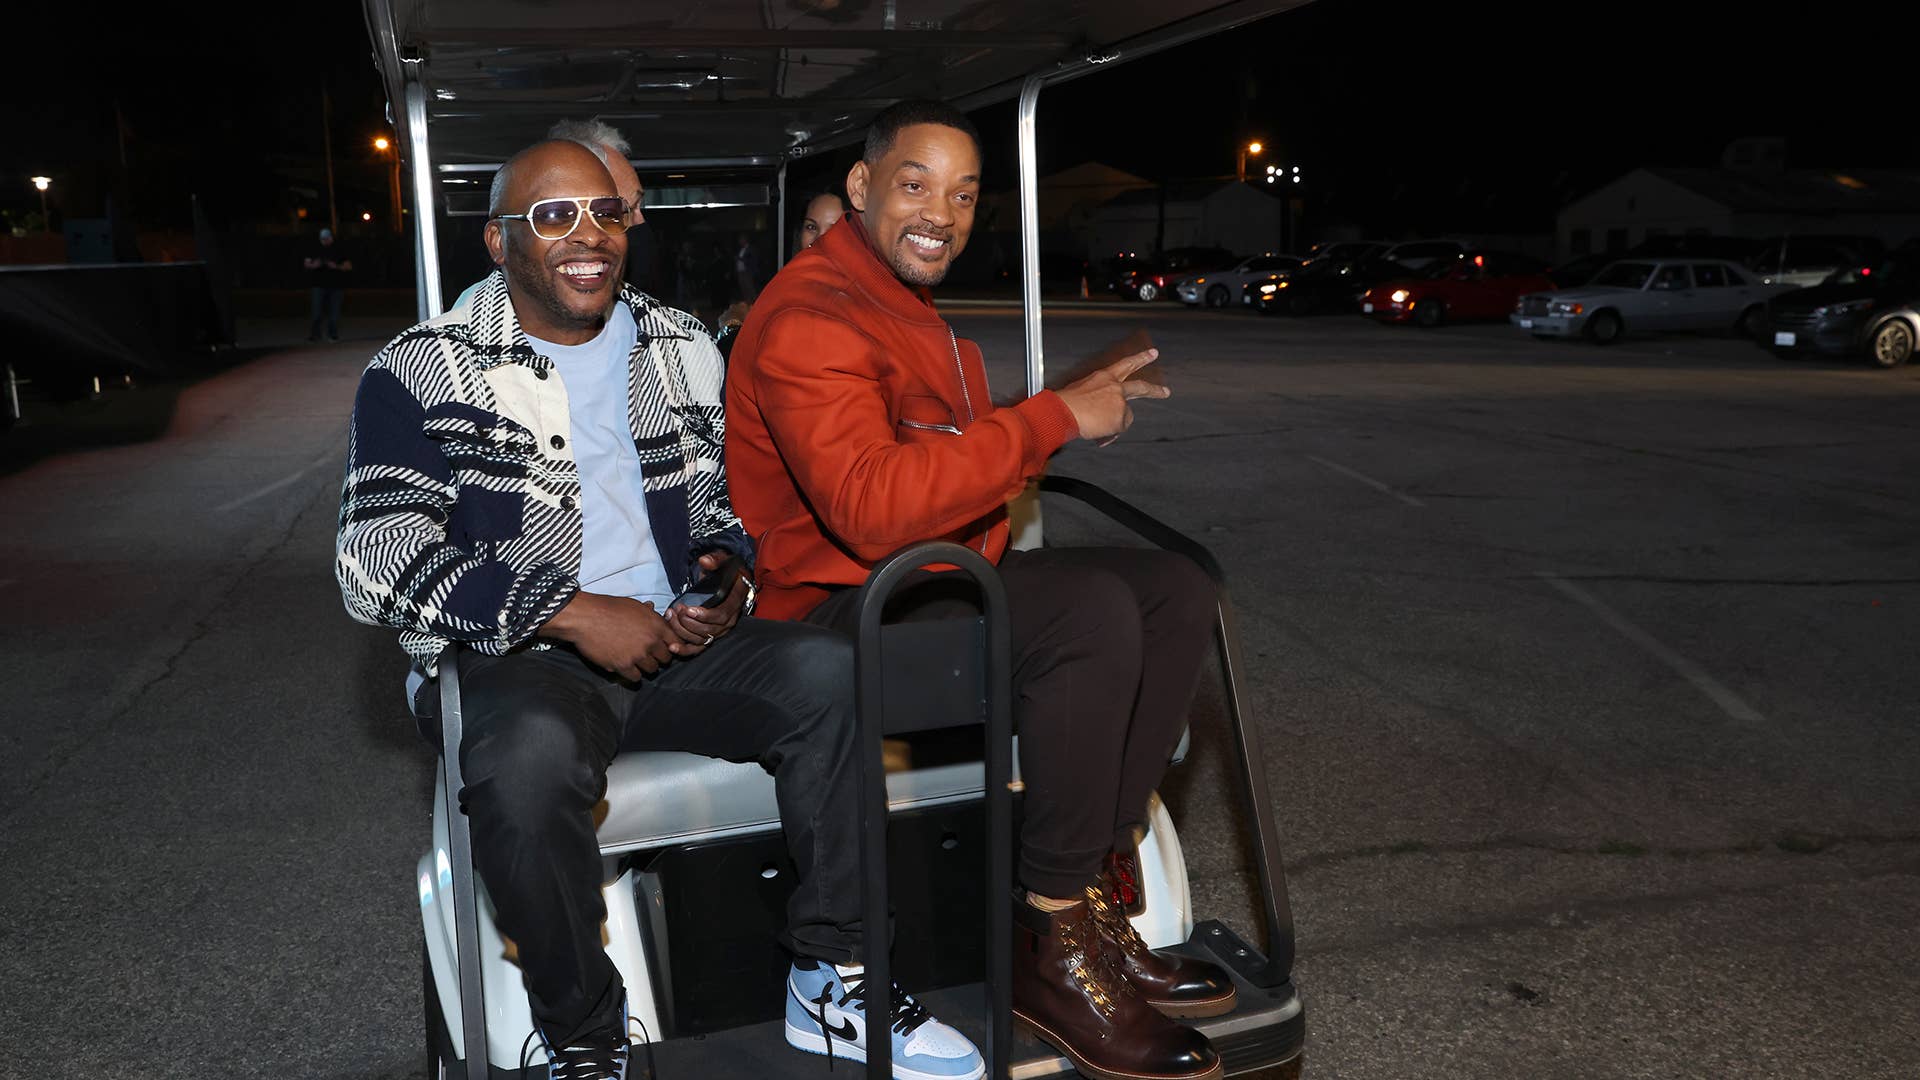 DJ Jazzy Jeff and Will Smith attend Peacock's new drama series "Bel-Air"